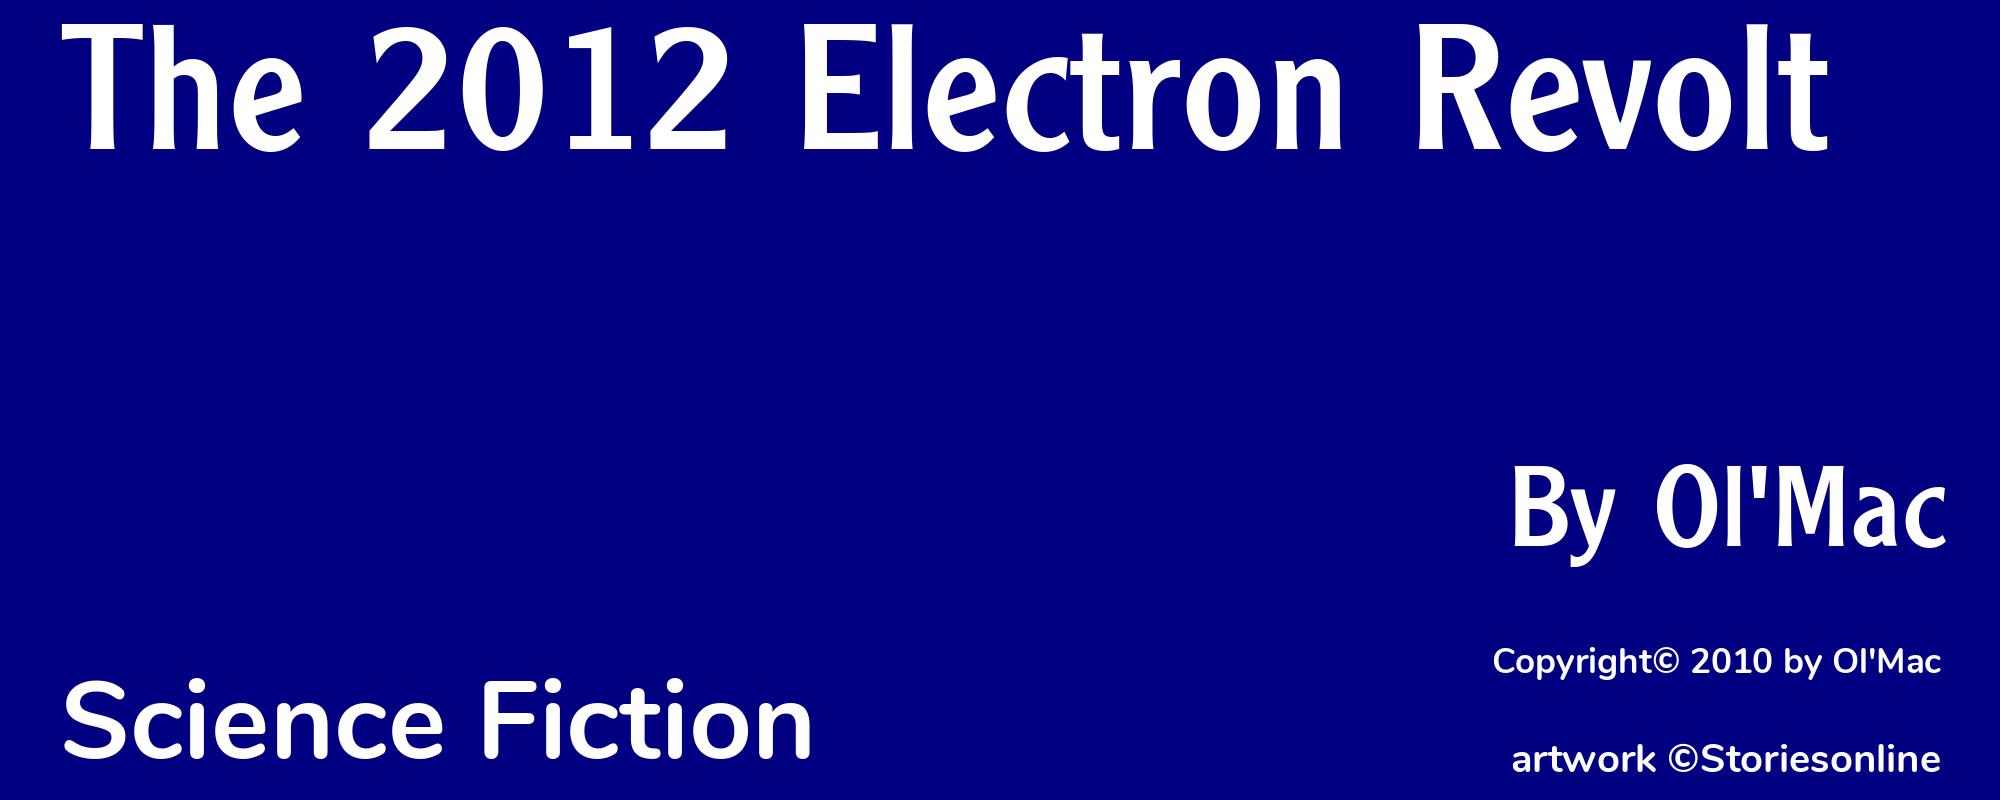 The 2012 Electron Revolt - Cover